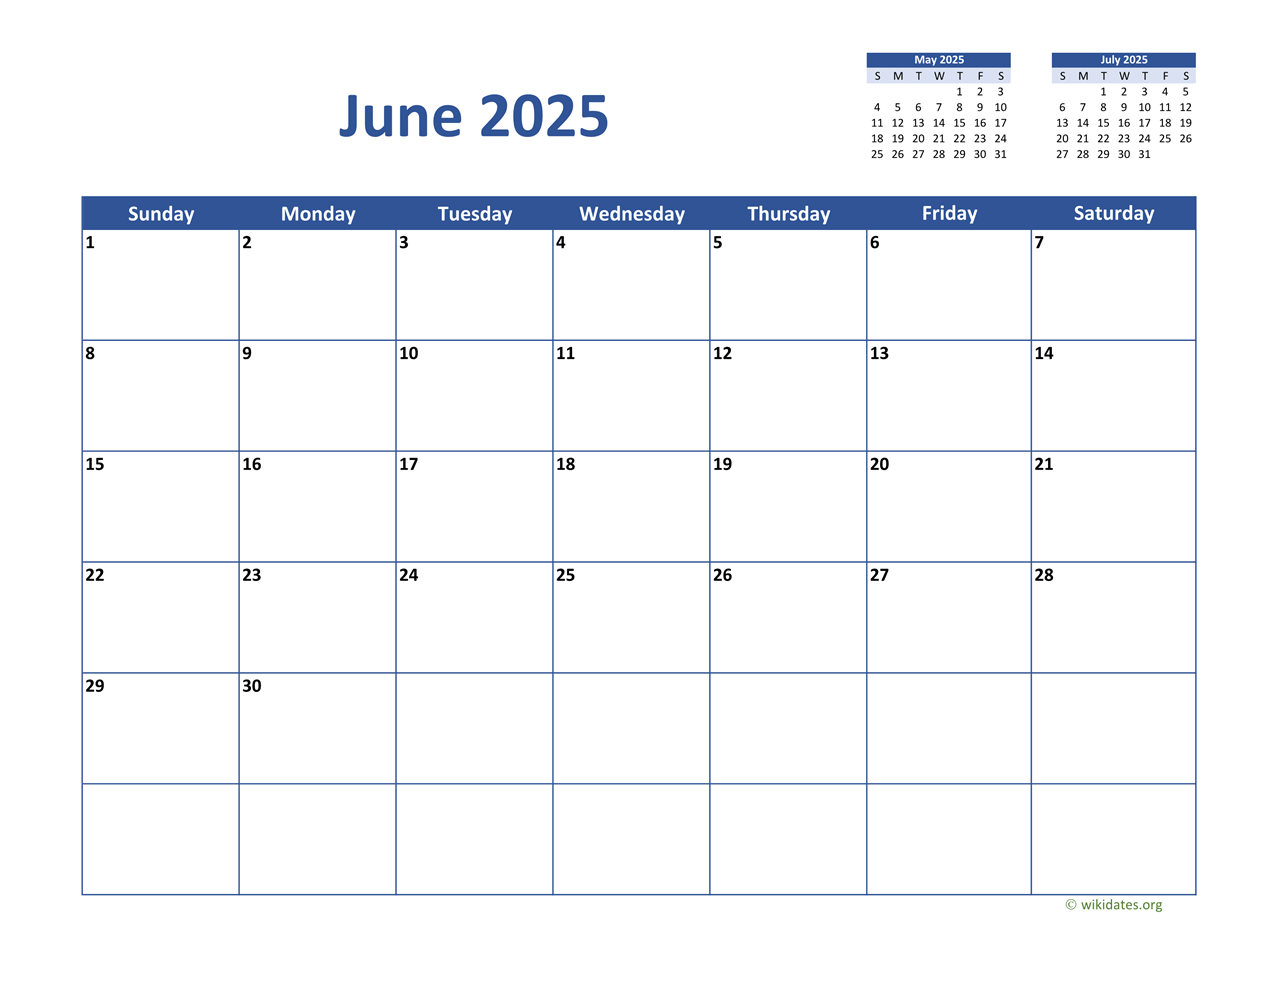 june-2025-planner-with-namibia-holidays